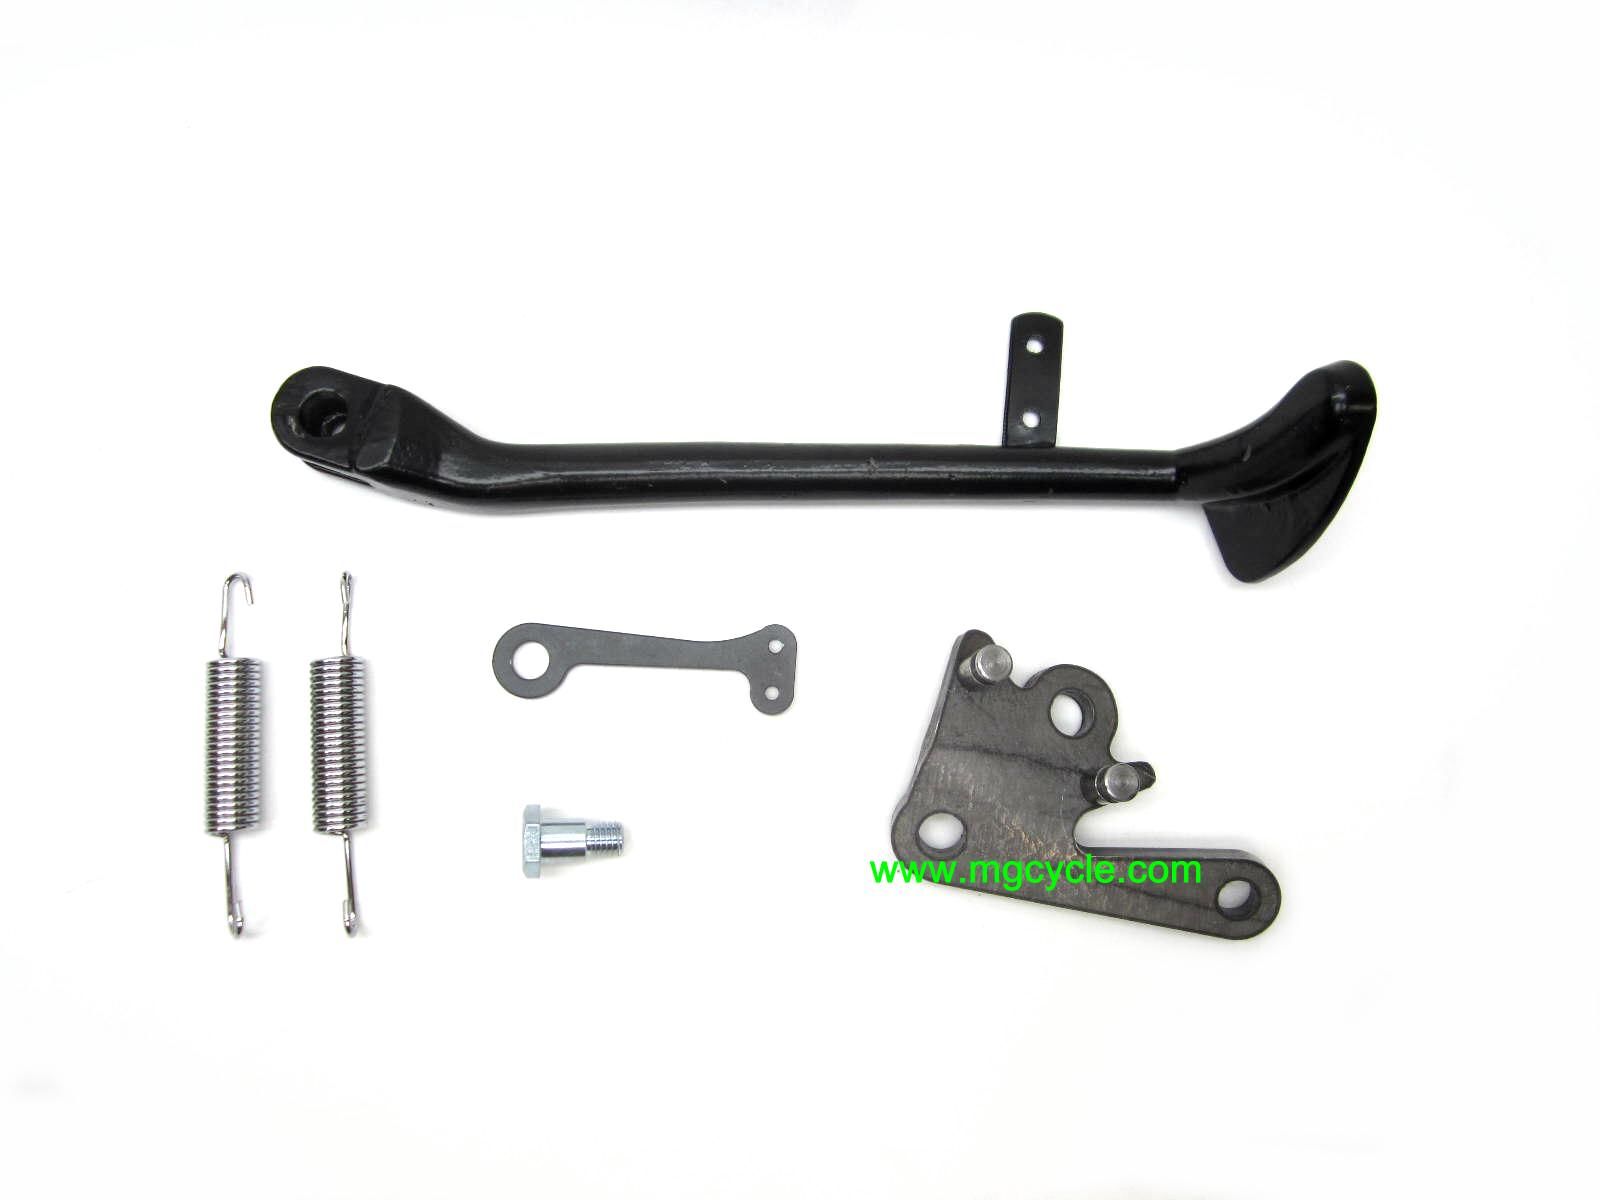 Mid-mount side stand kit for early Tonti frame models